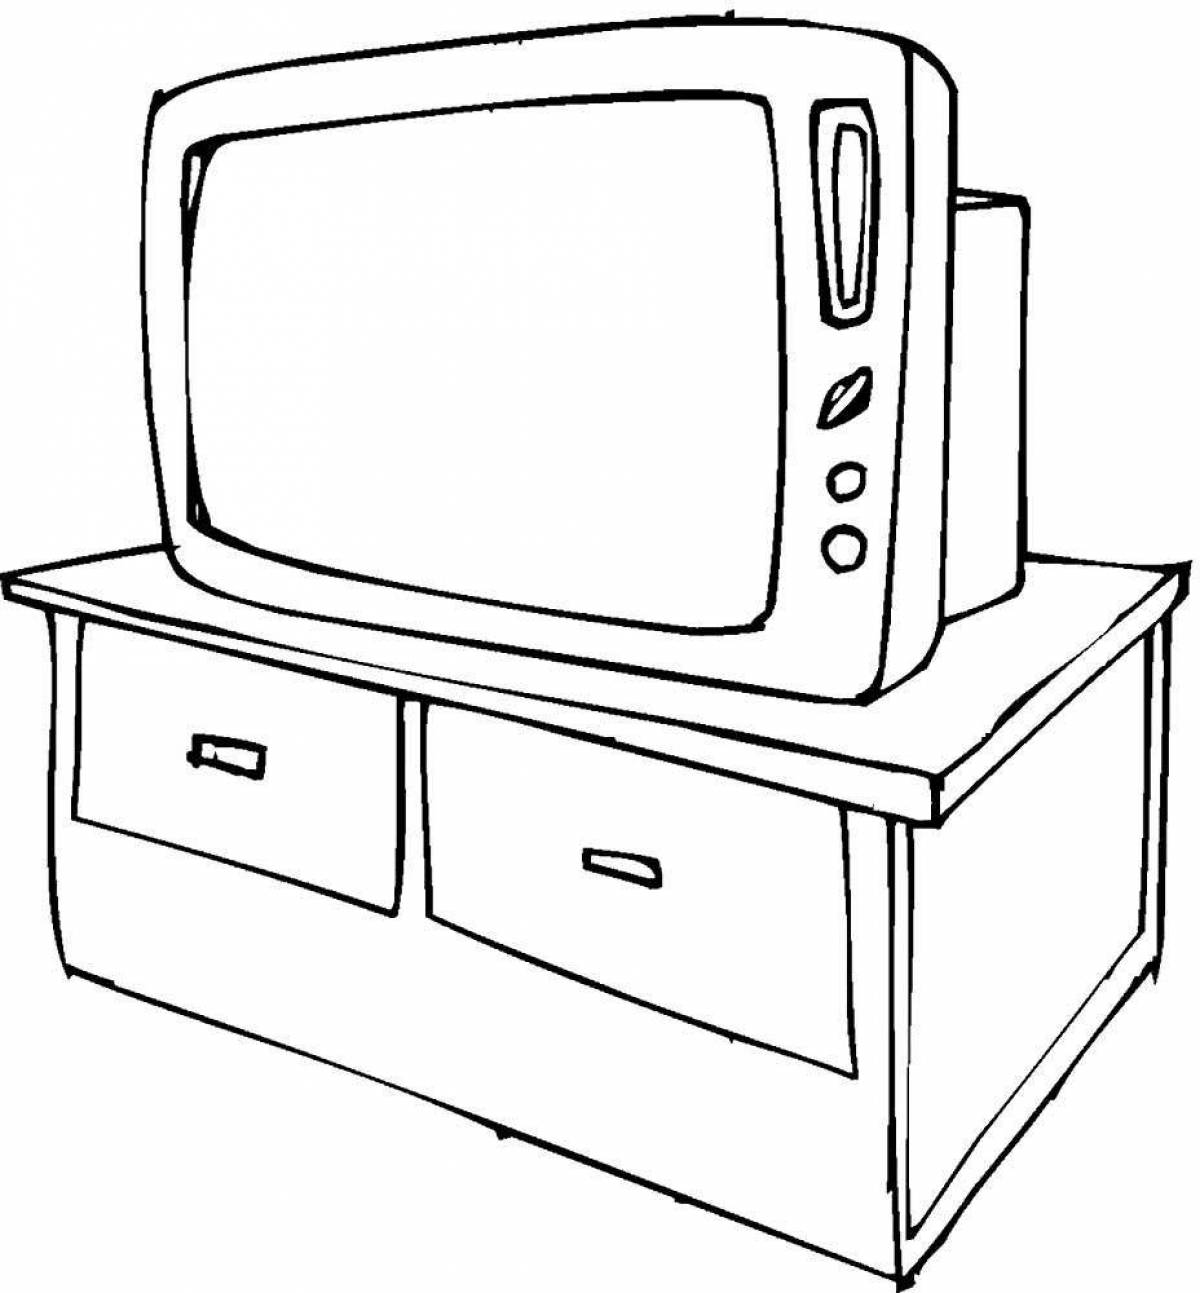 Color-frenzy tv coloring pages for kids